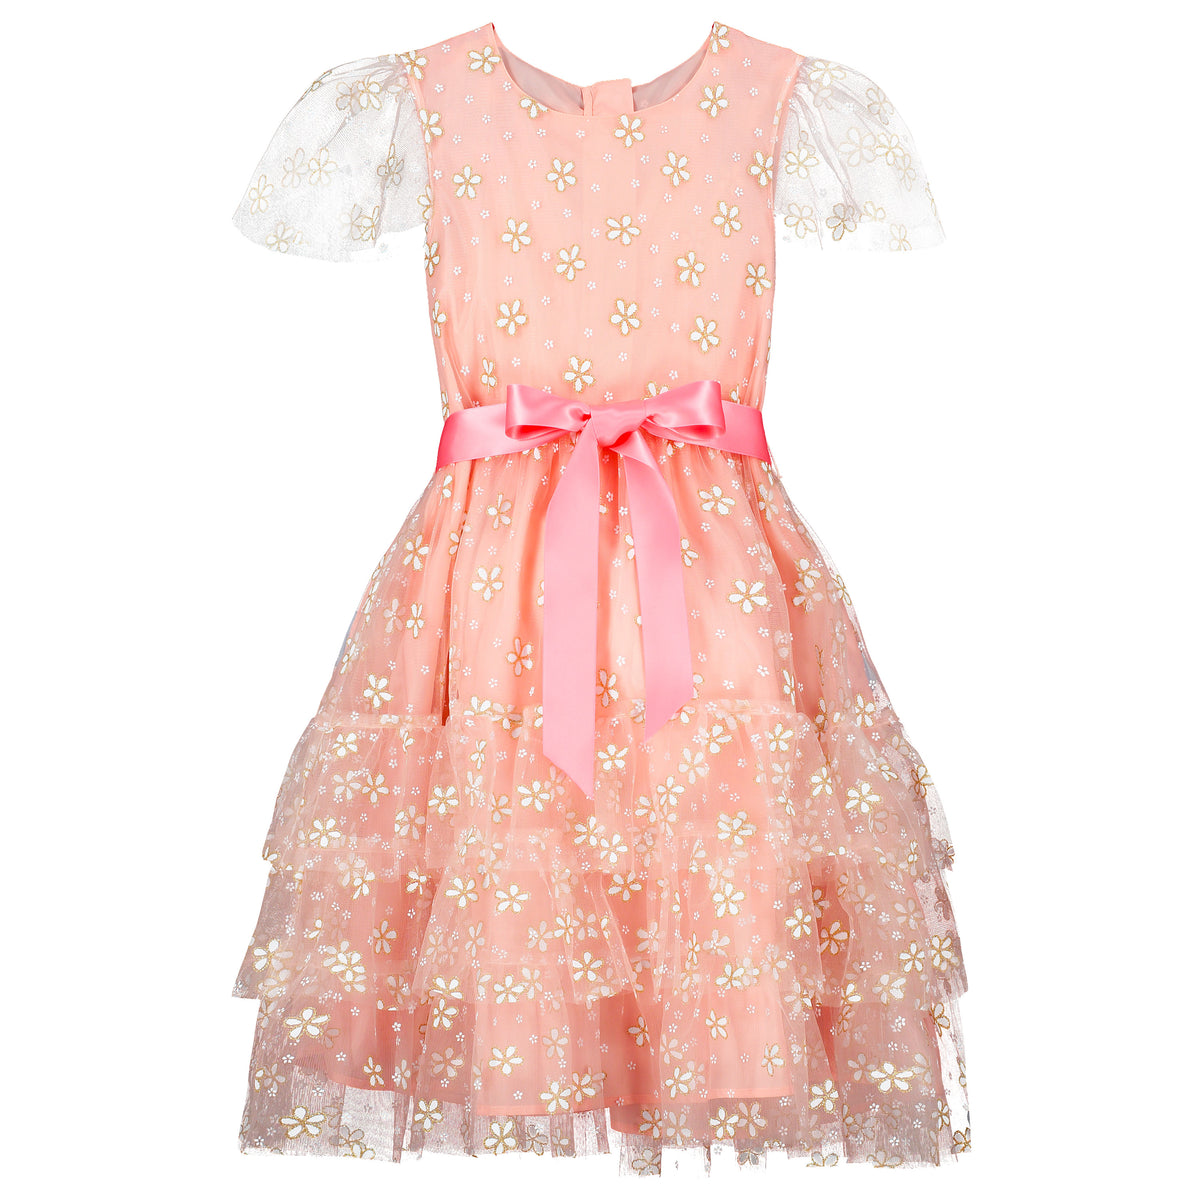 Girls Party Dress Cinderella Pink & Gold Blossom Tulle | Holly Hastie London